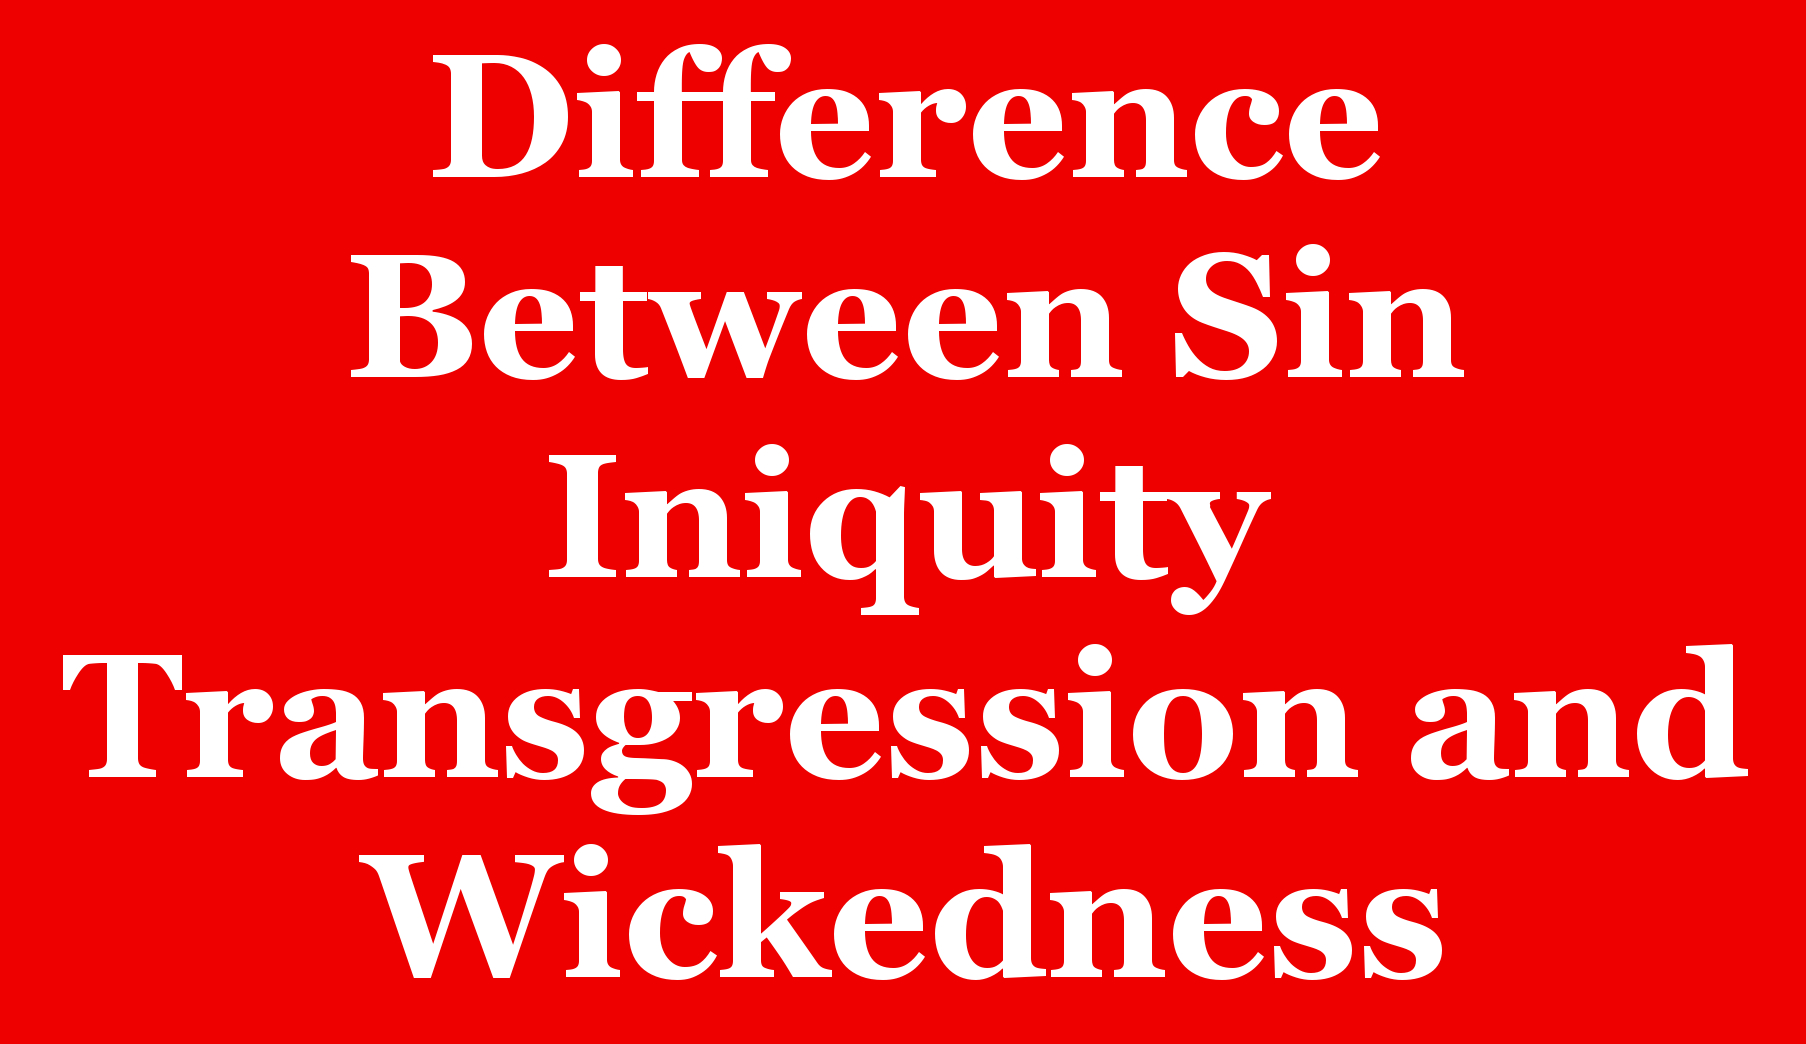 Difference Between Sin Iniquity Transgression and Wickedness